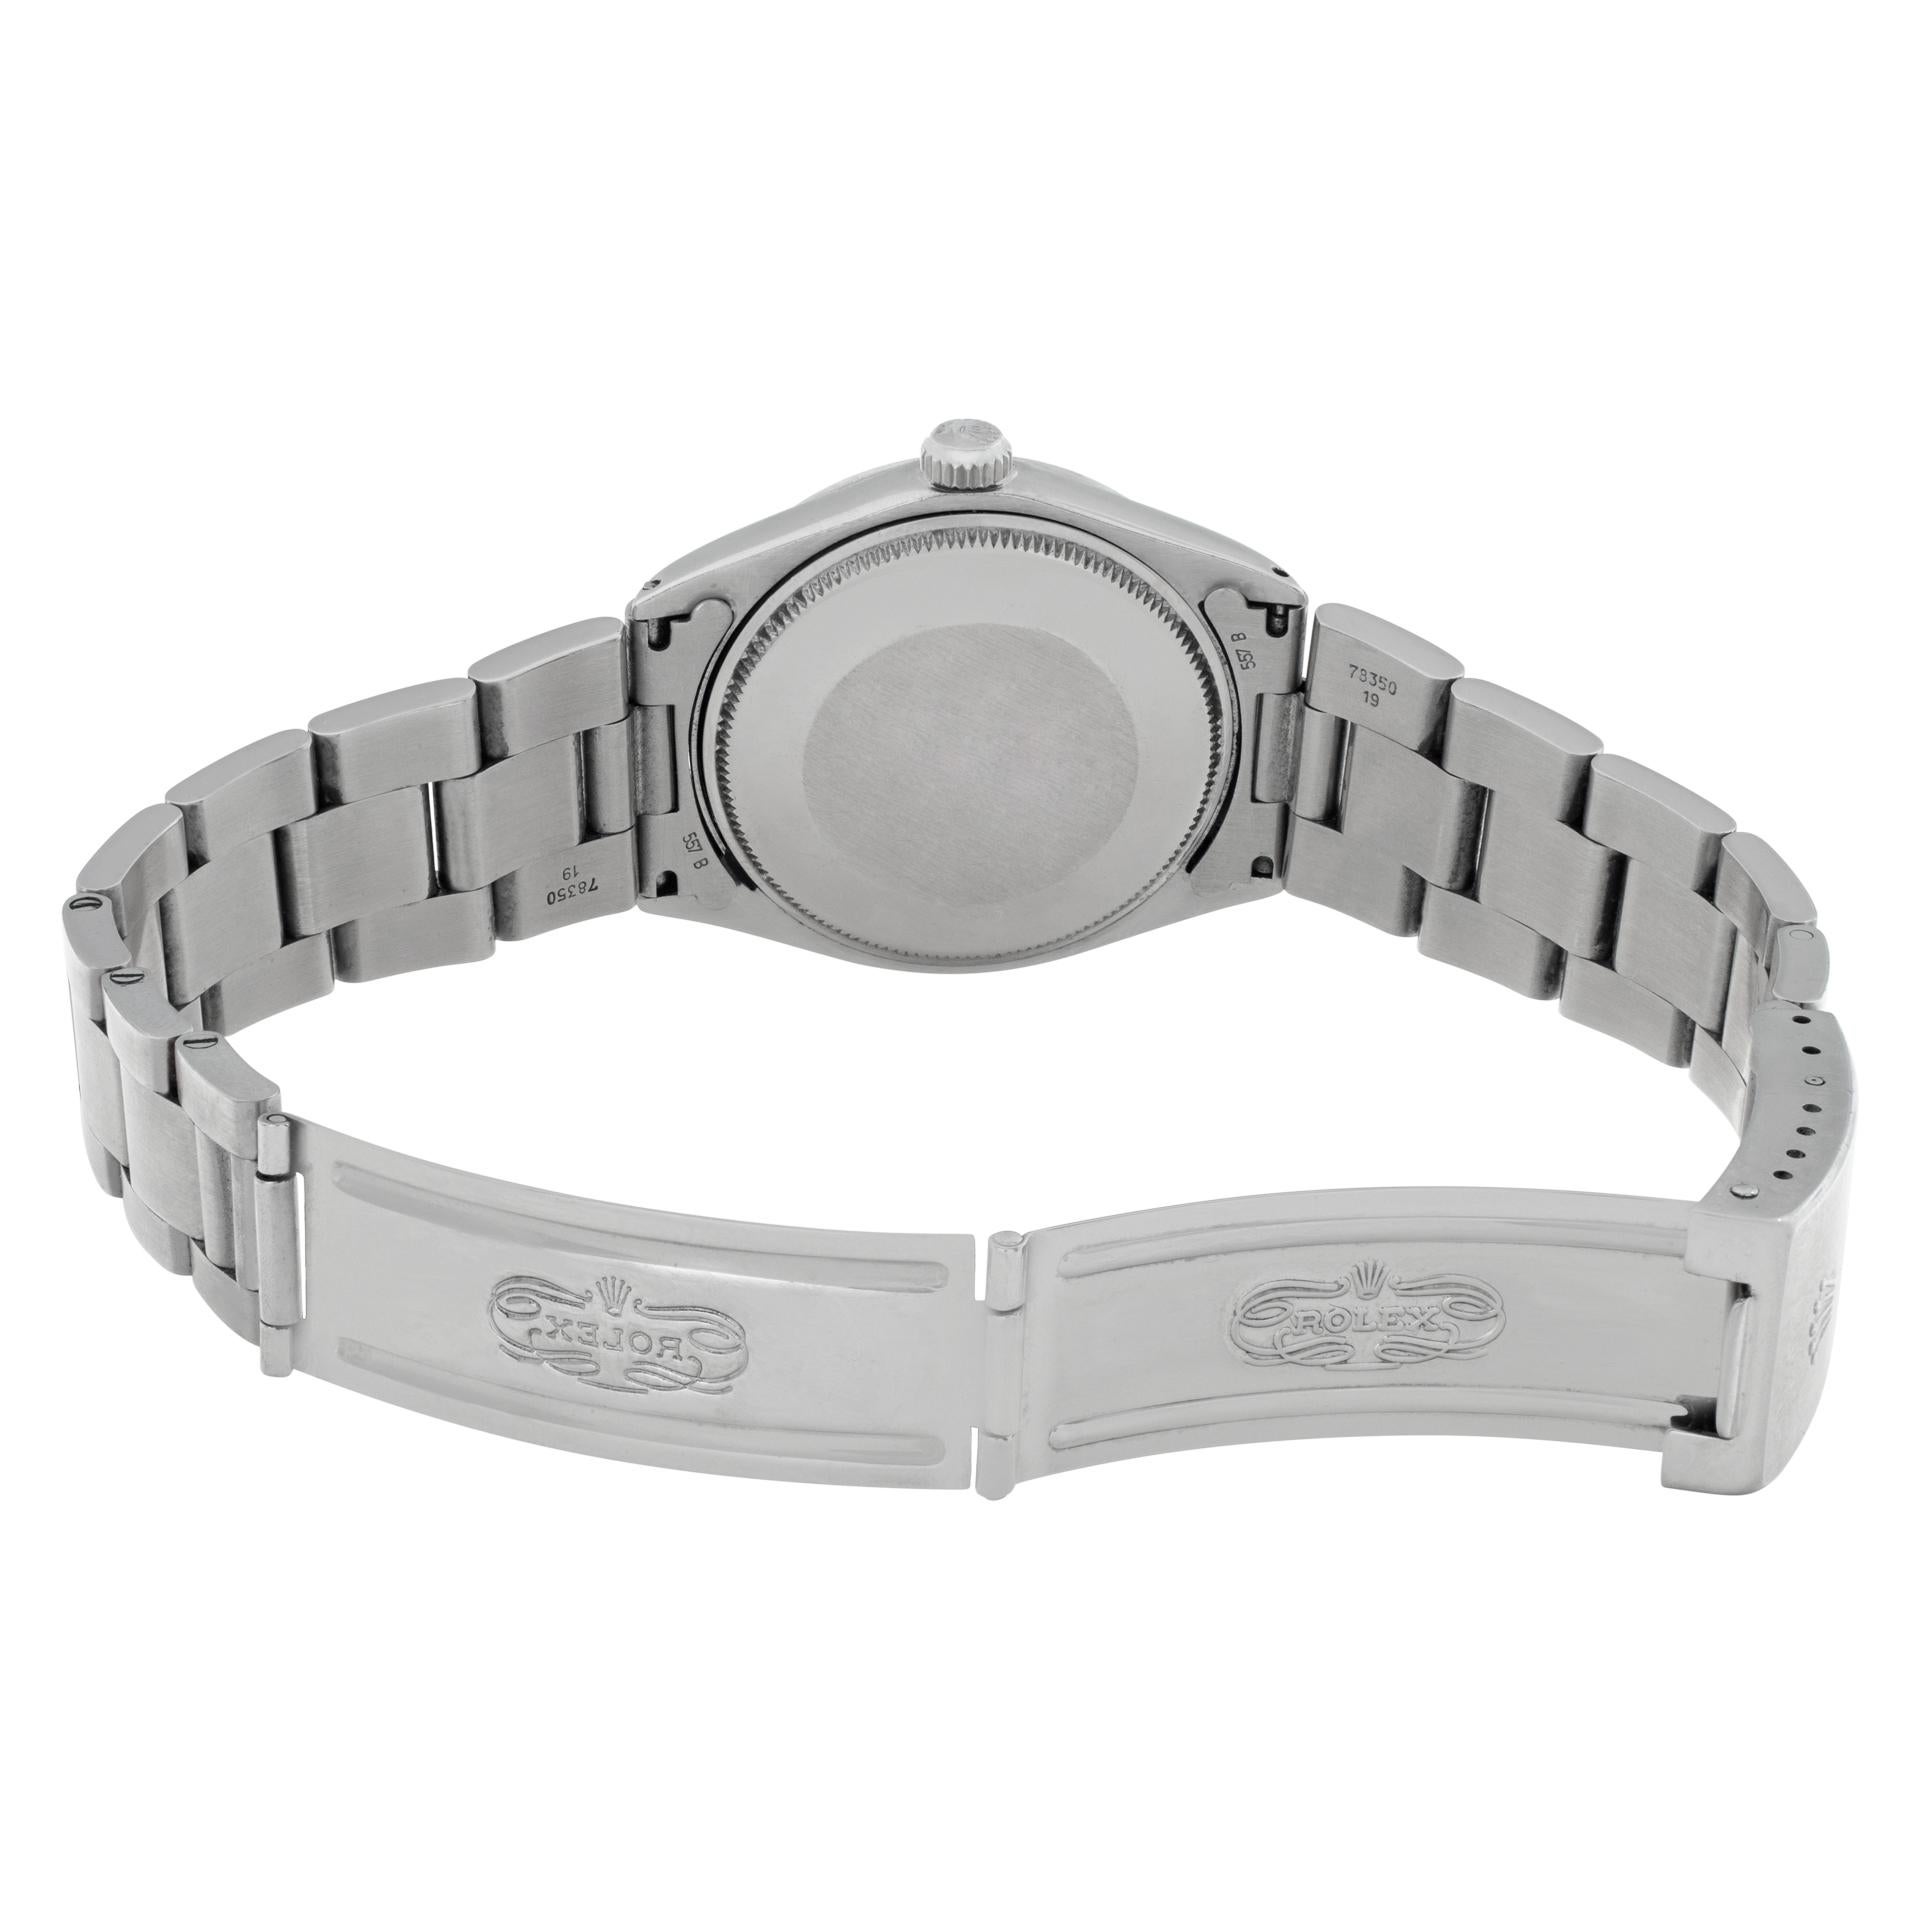 Women's or Men's Rolex Air King 5500 in Stainless Steel Silver with a dial 33mm Automatic watch